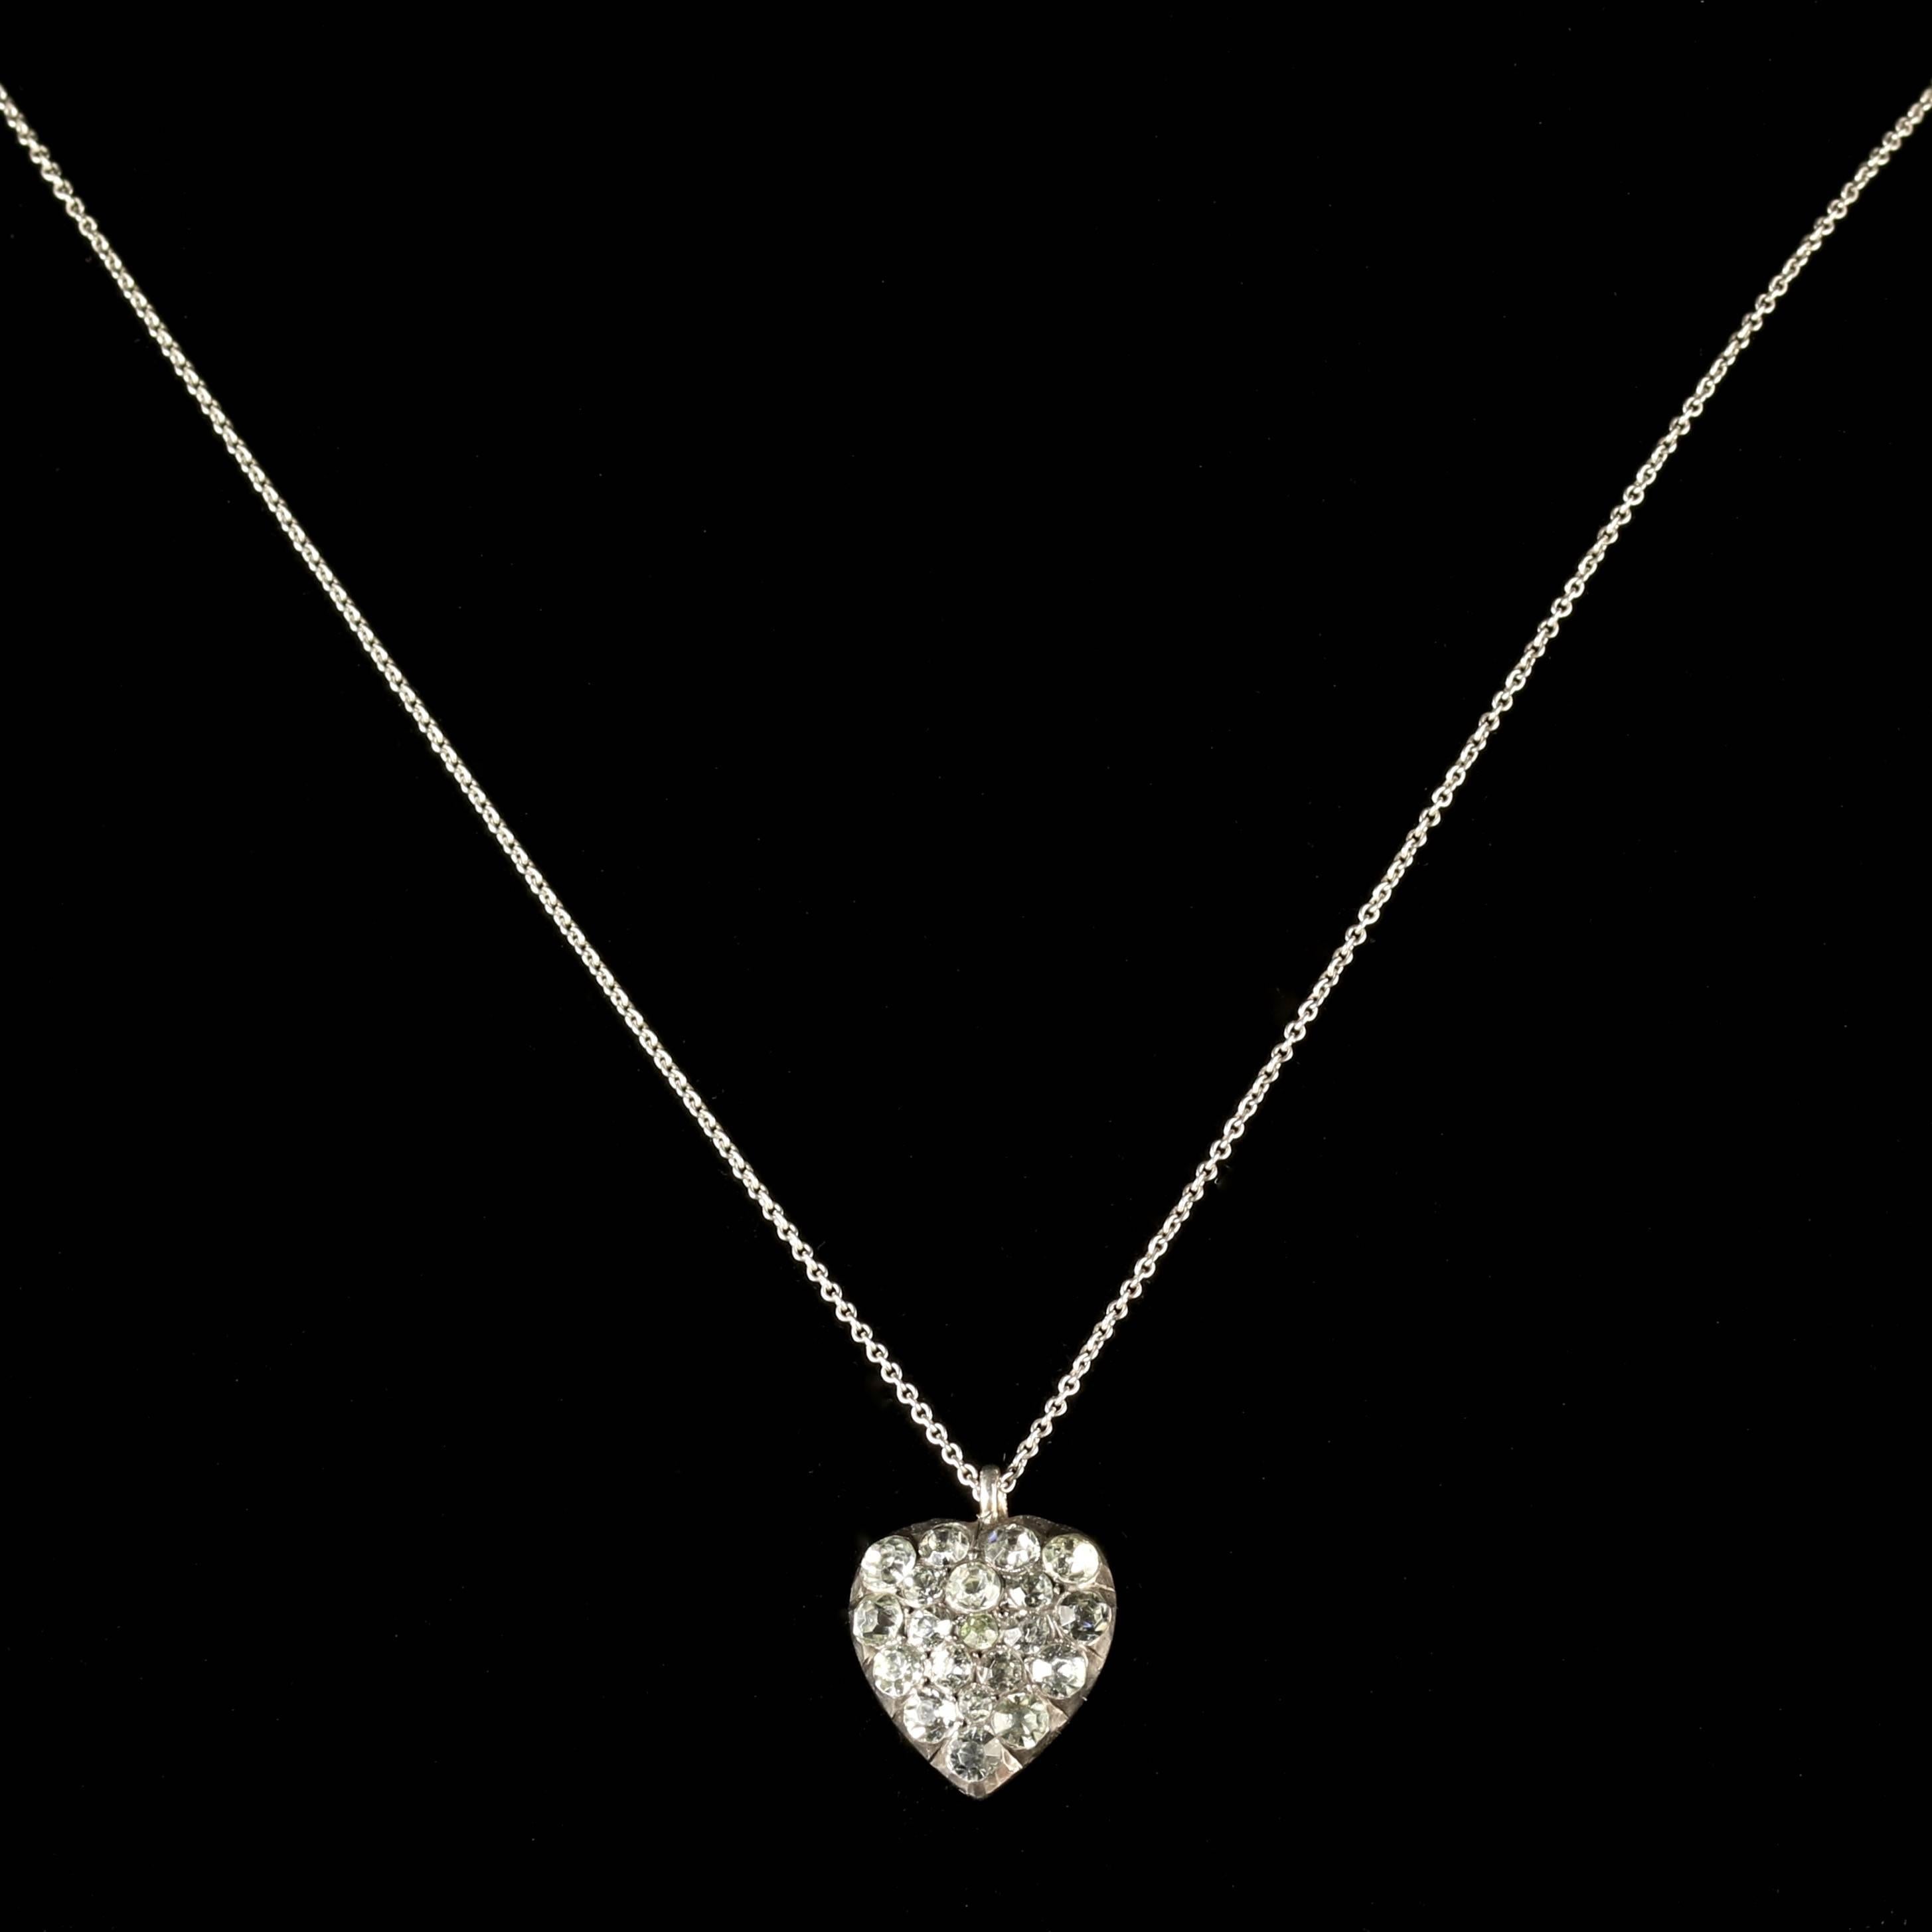 This very beautiful Sterling Silver Georgian Paste heart pendant is Circa 1800.

Stunning bright White Paste Stones adorn this fabulous Georgian heart, set on a Silver chain, all